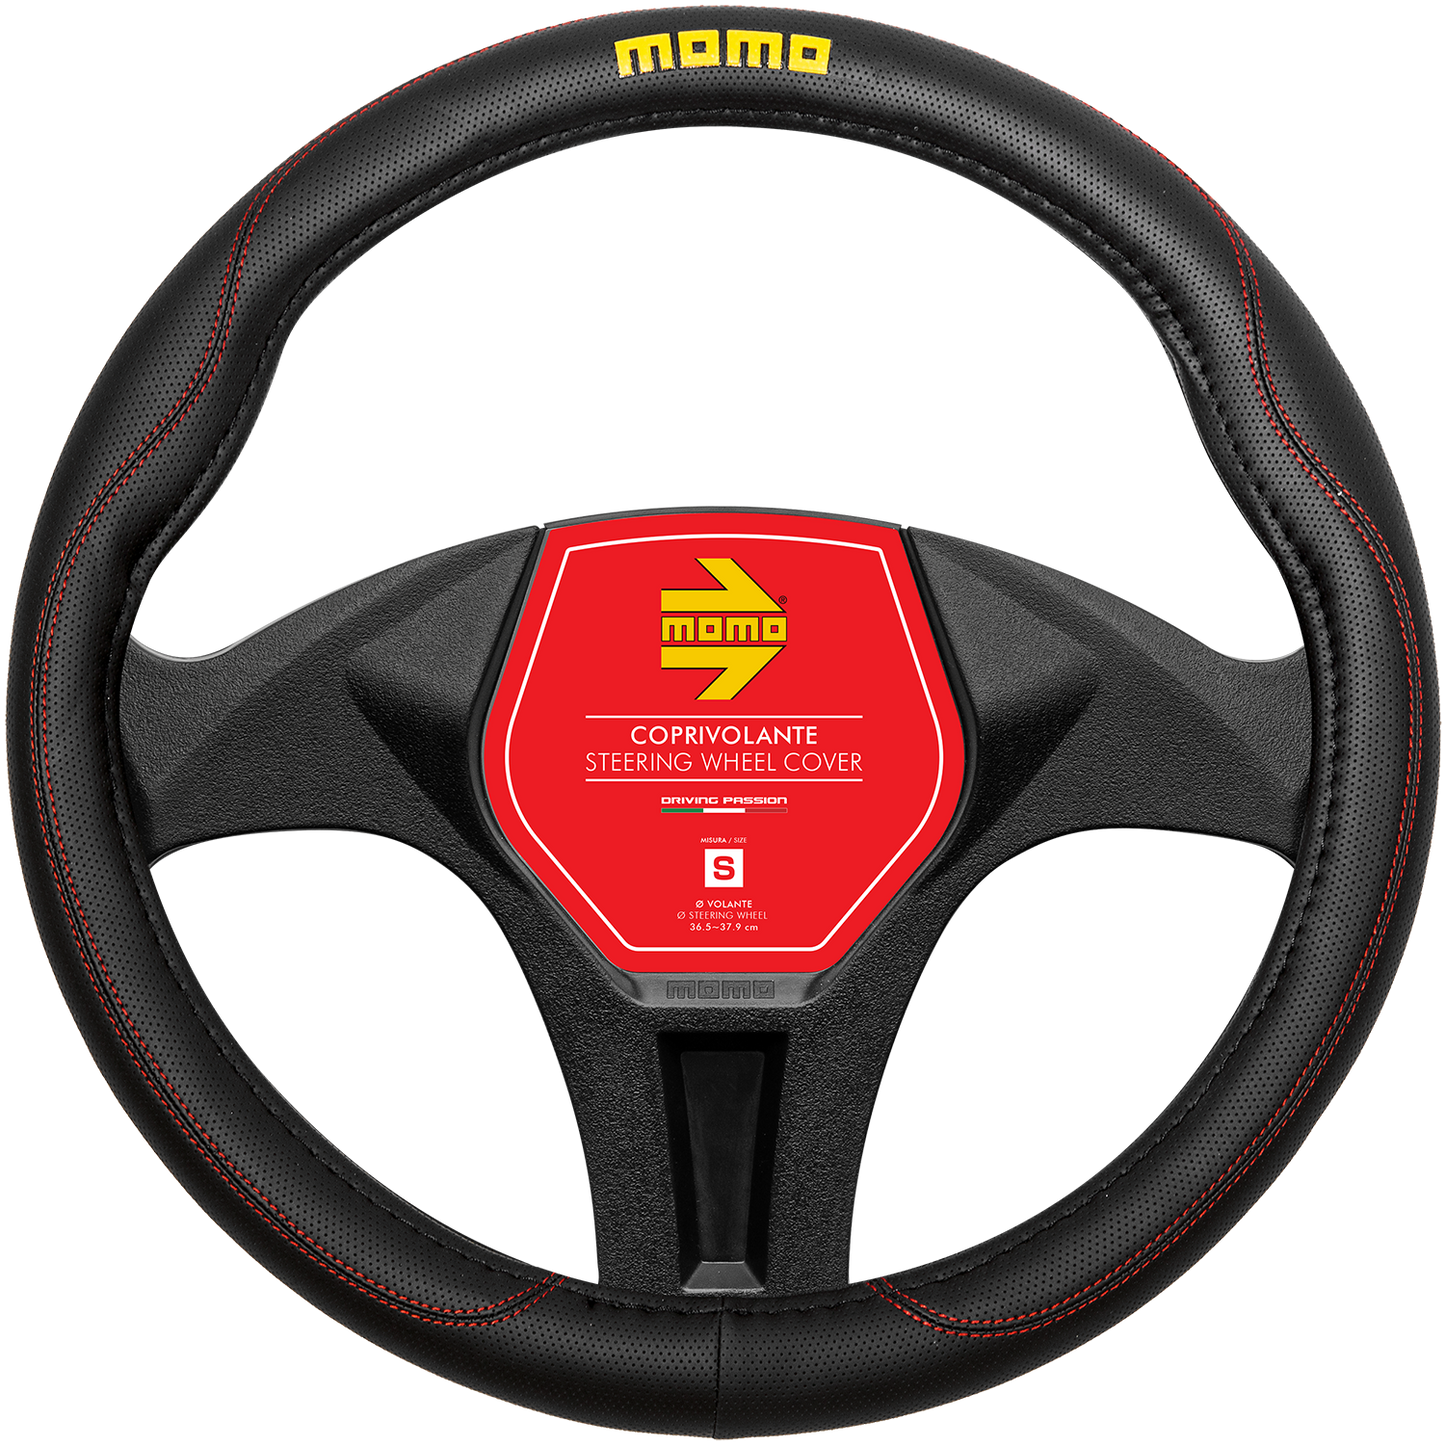 Momo Steering Wheel Cover - COMFORT - BLACK/RED PU - SIZE S